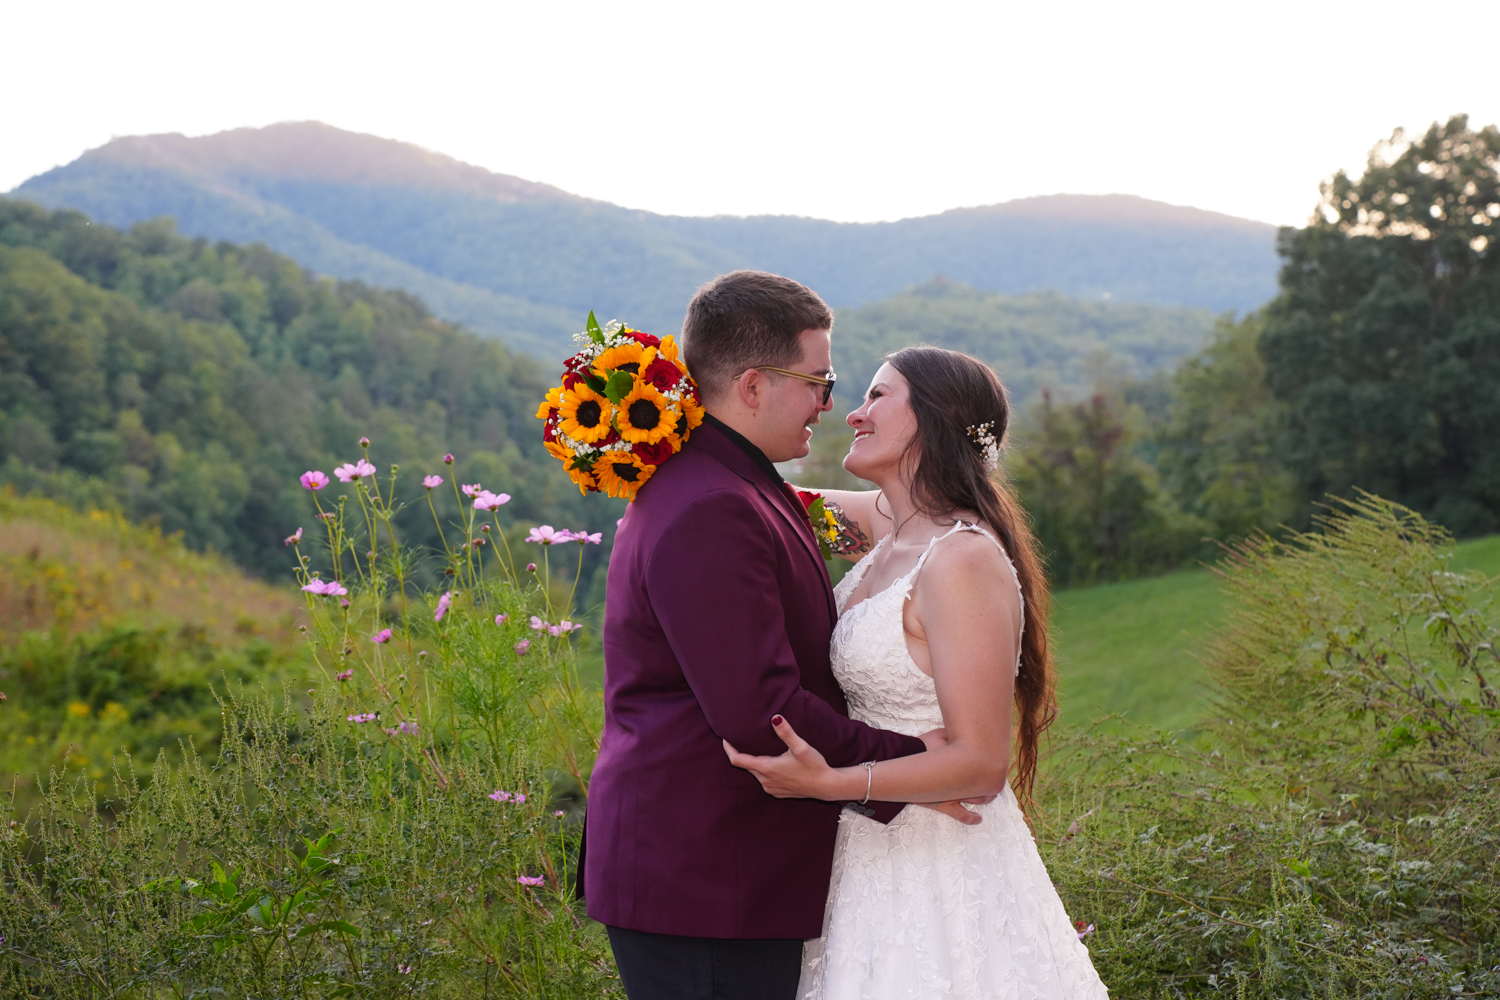 Wedding couple gazing into each others eyes at a mountain view with a meadow behind them in East Tennessee